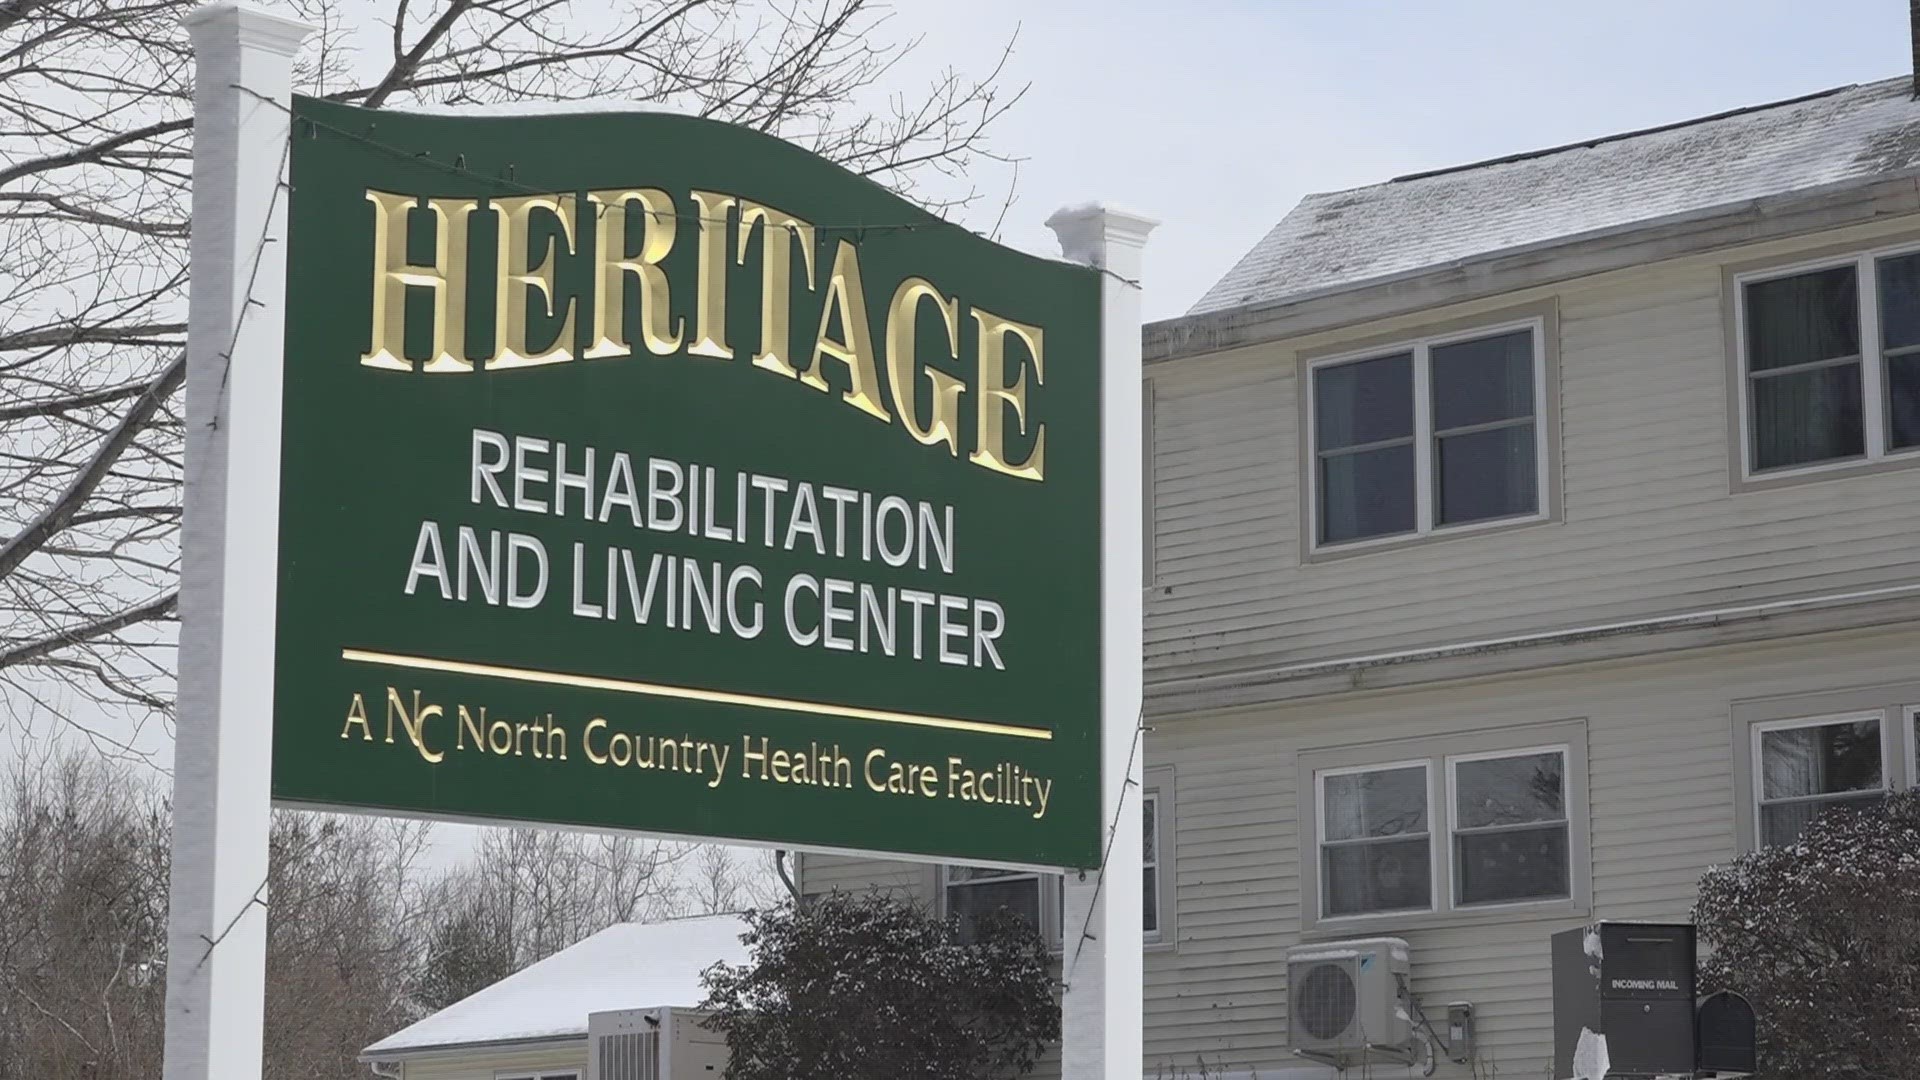 The Maine Health Care Association confirmed Winthrop's Heritage Rehabilitation and Living Center's upcoming closure.